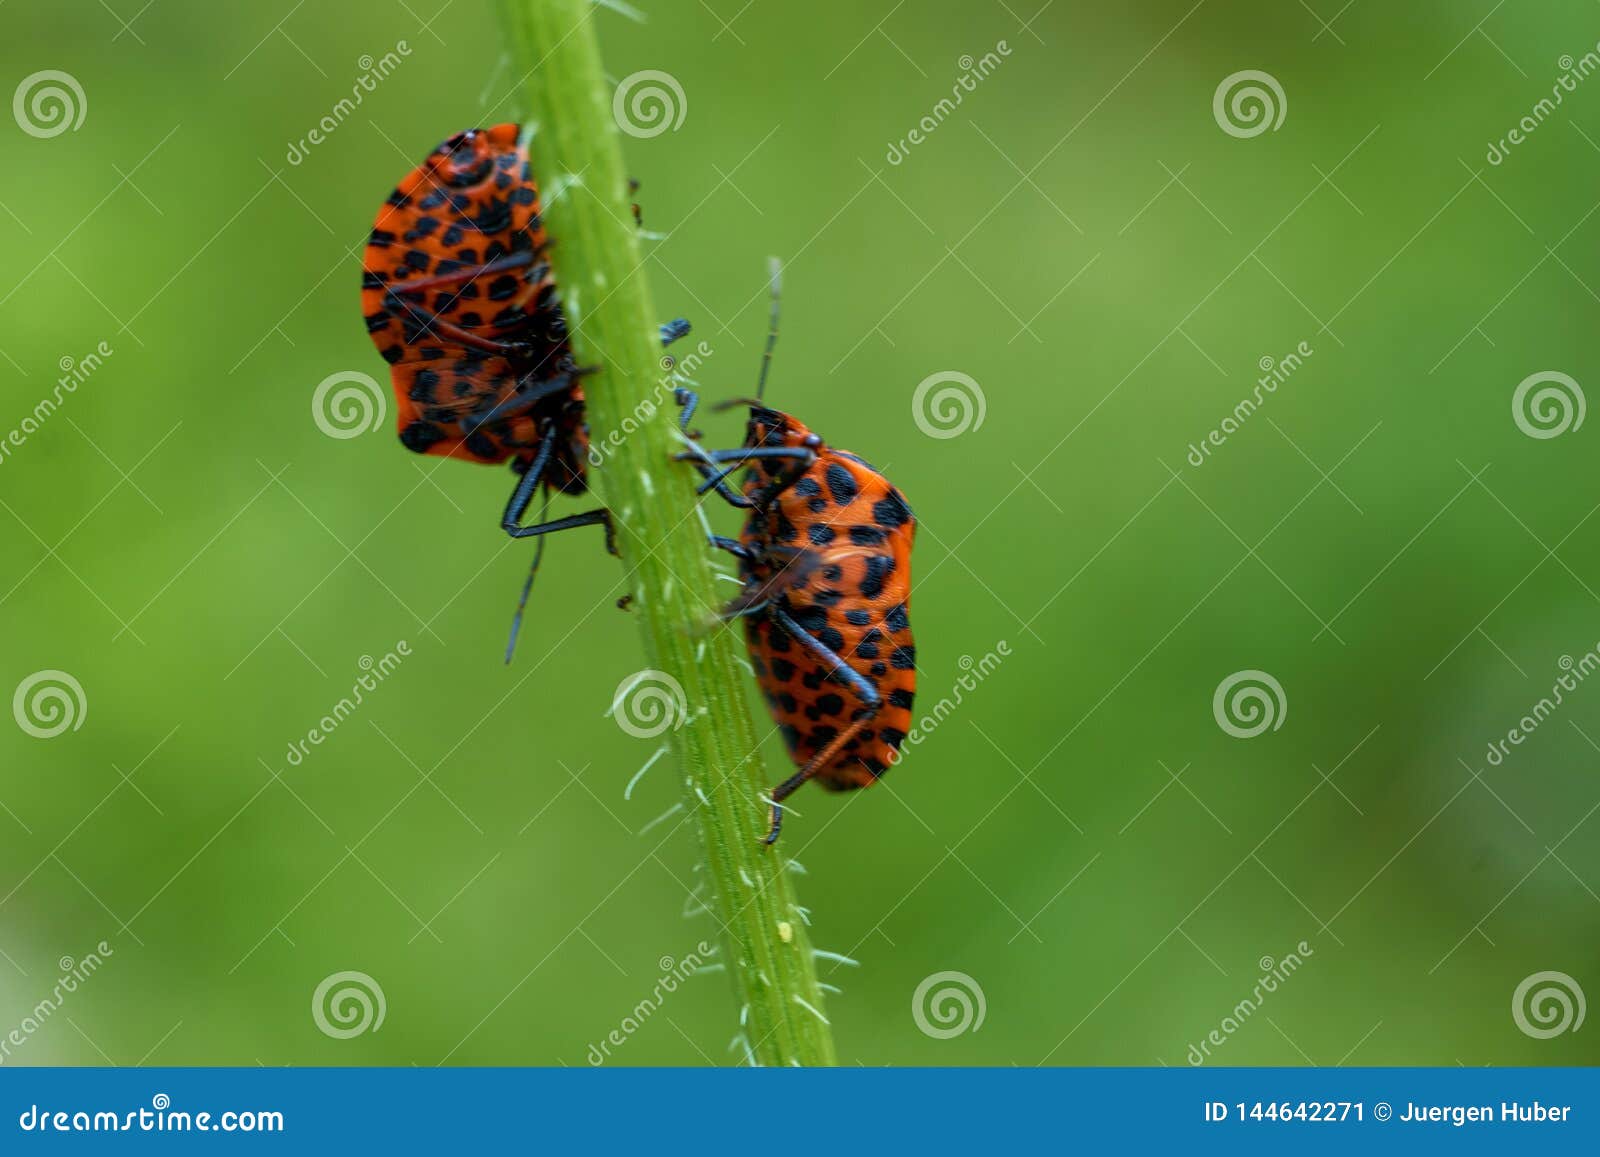 Little Red Bugs In Field On A Leaf Stock Image Image Of